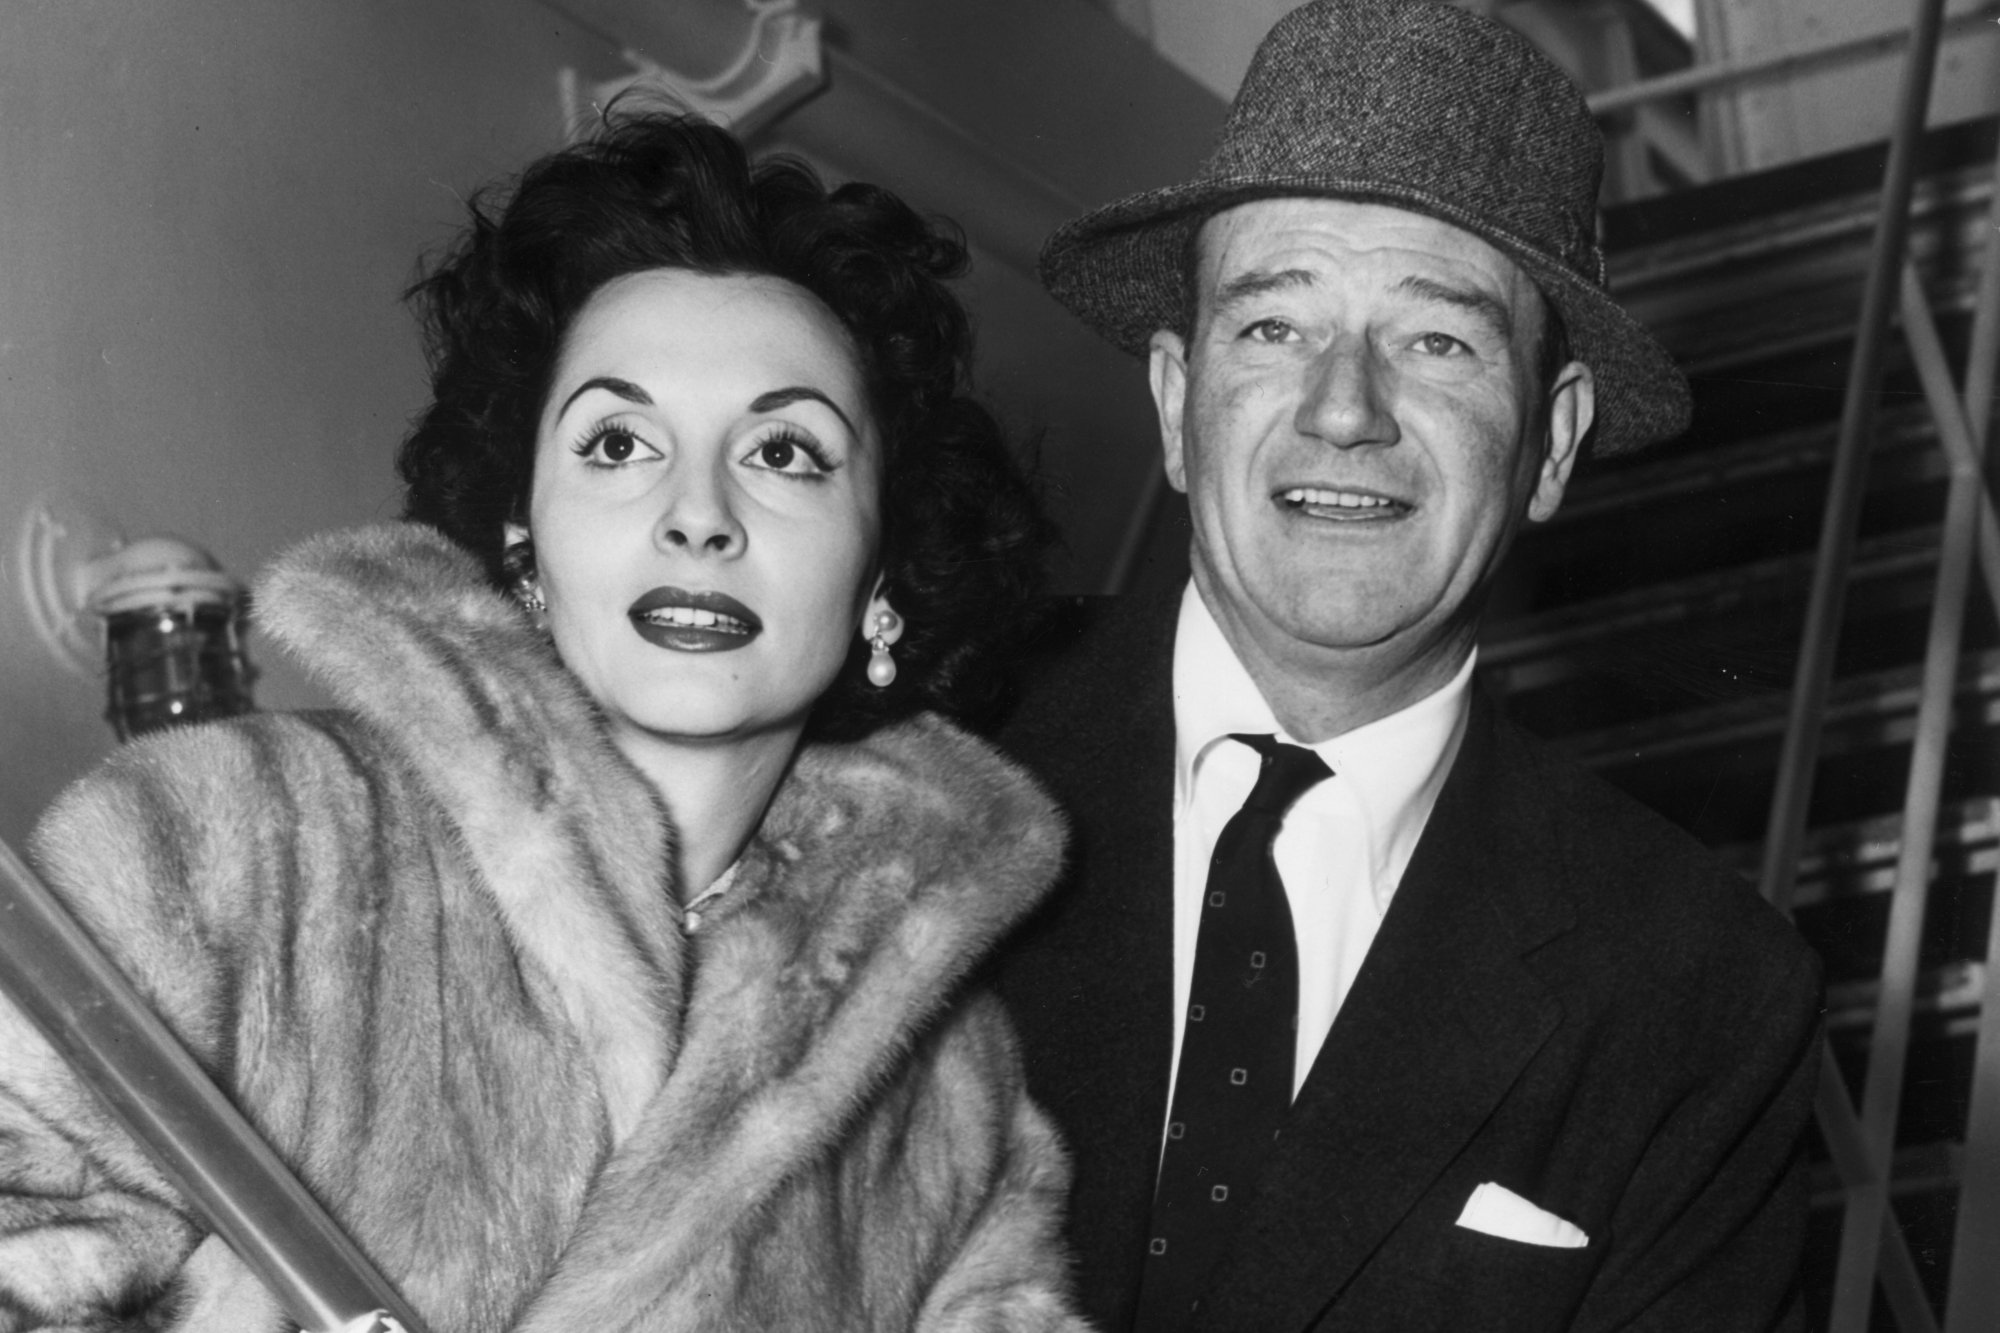 Pilar Palette and John Wayne, who was 'obsessed' with Latin women. In a black-and-white picture, she's in a fur and he's wearing a suit and tie